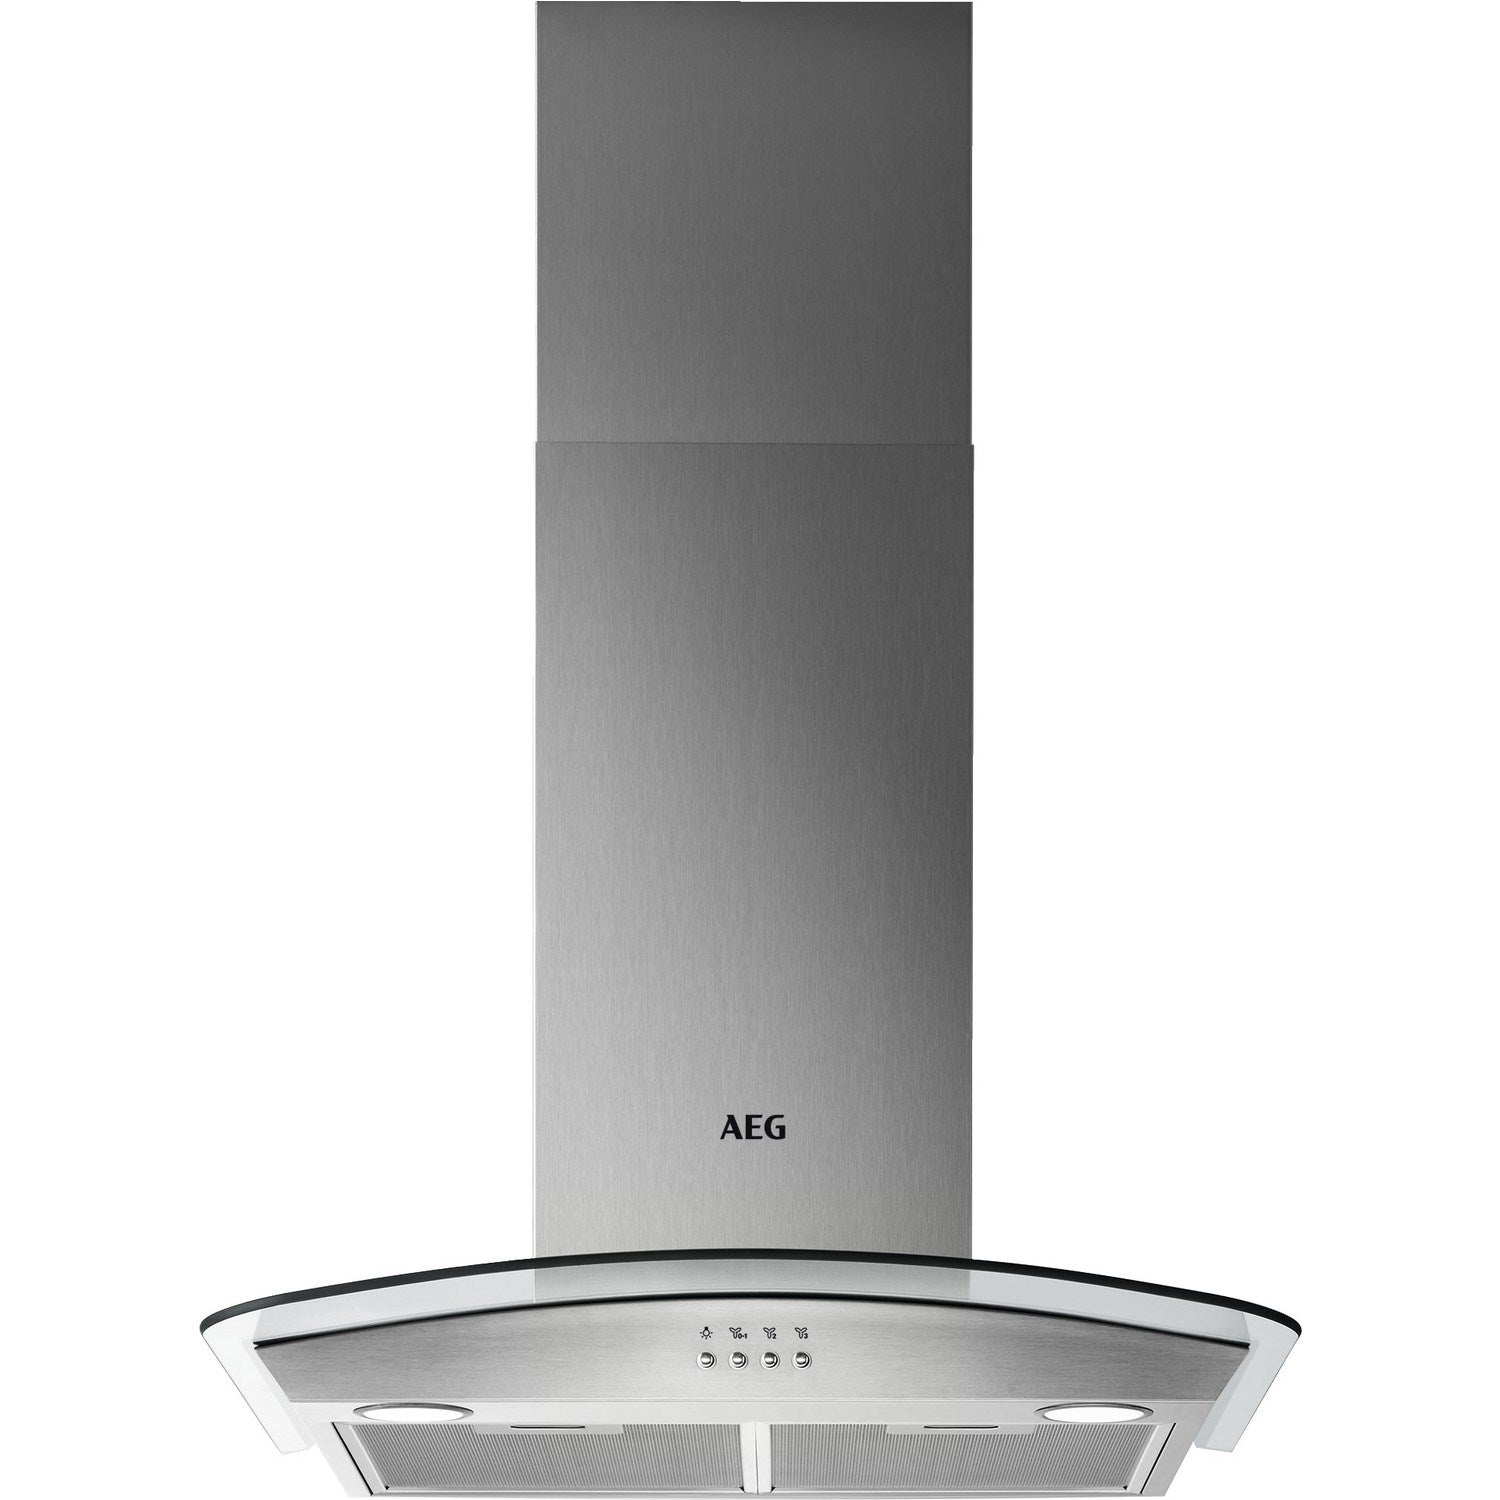 AEG DTB3653M Chimney Hood 60cm Curved Glass in Stainless Steel GRADE A